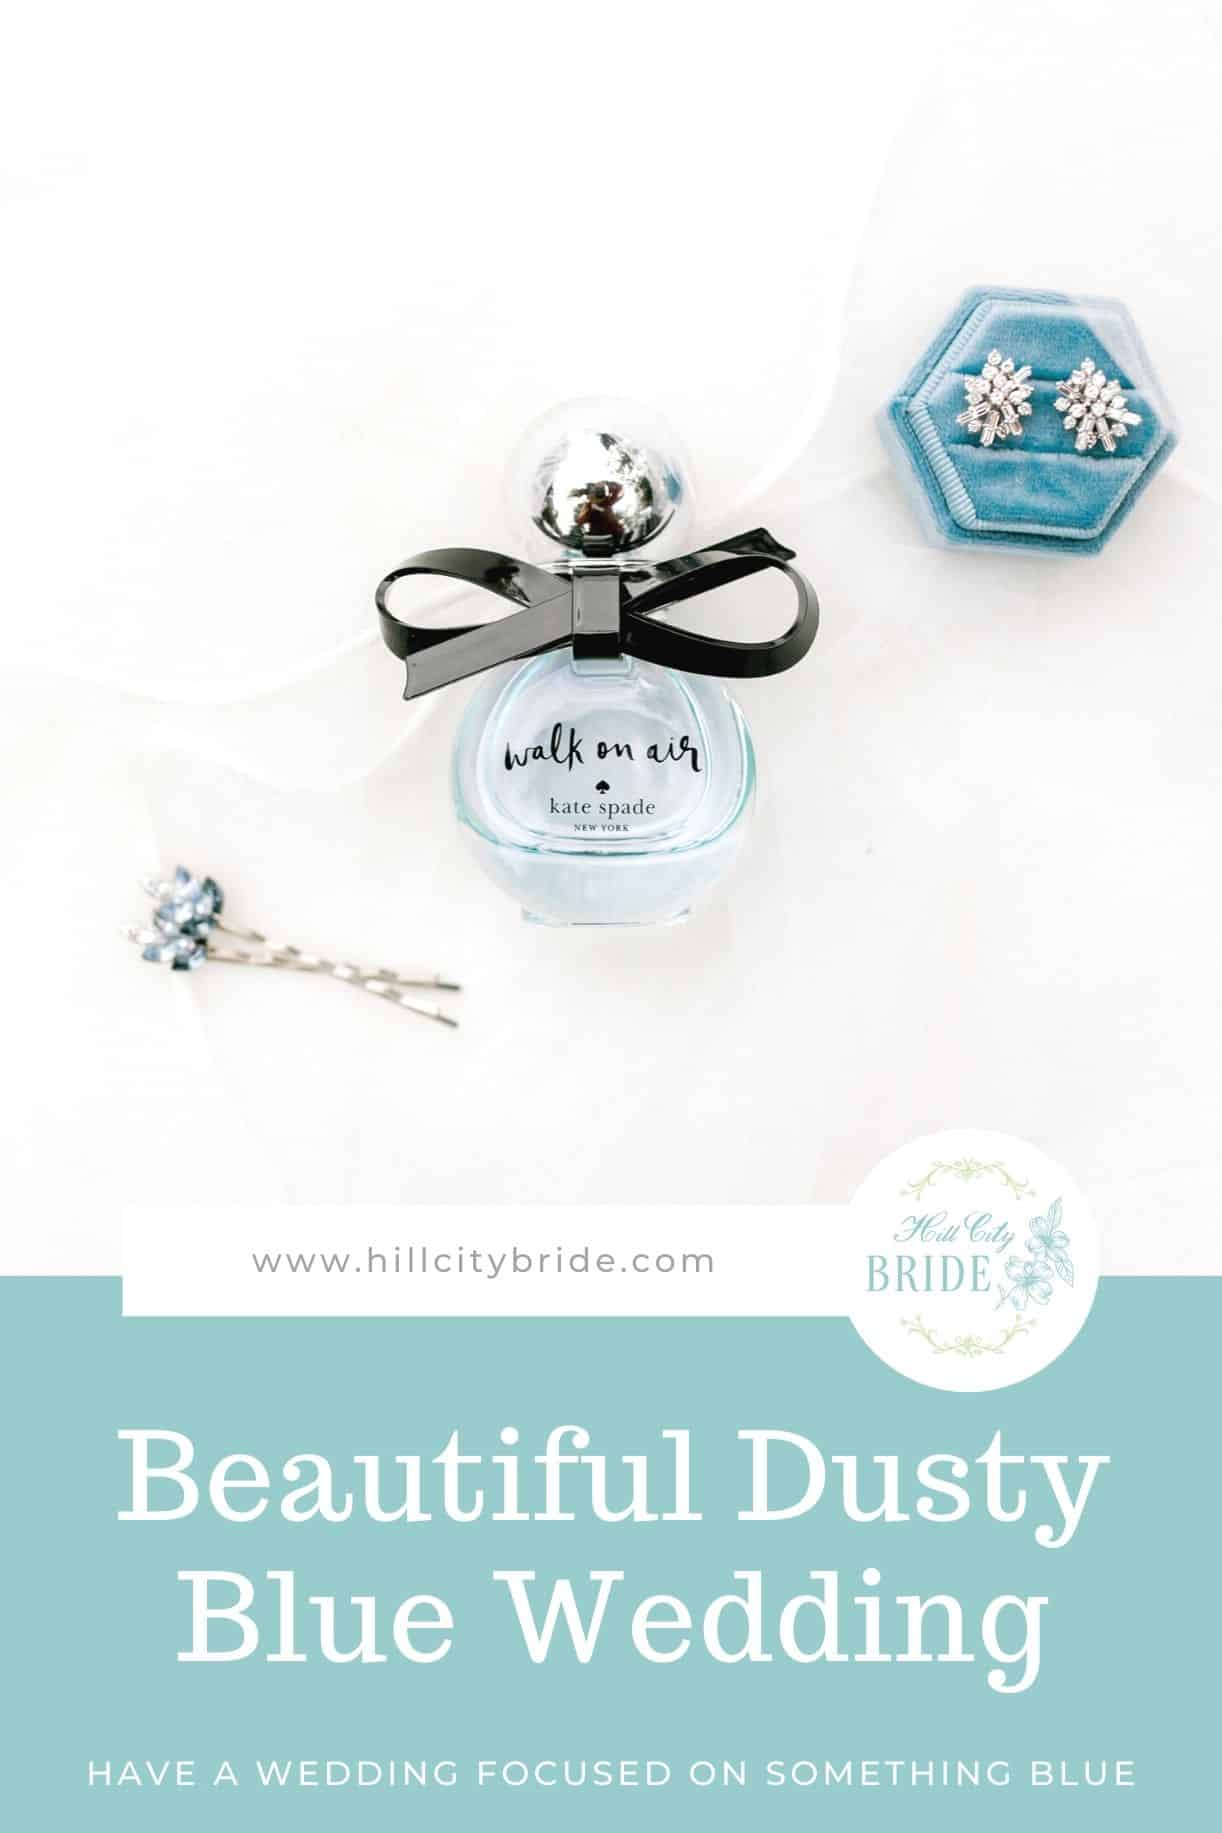 Use These Beautiful Dusty Blue Wedding Ideas for Your Big Day